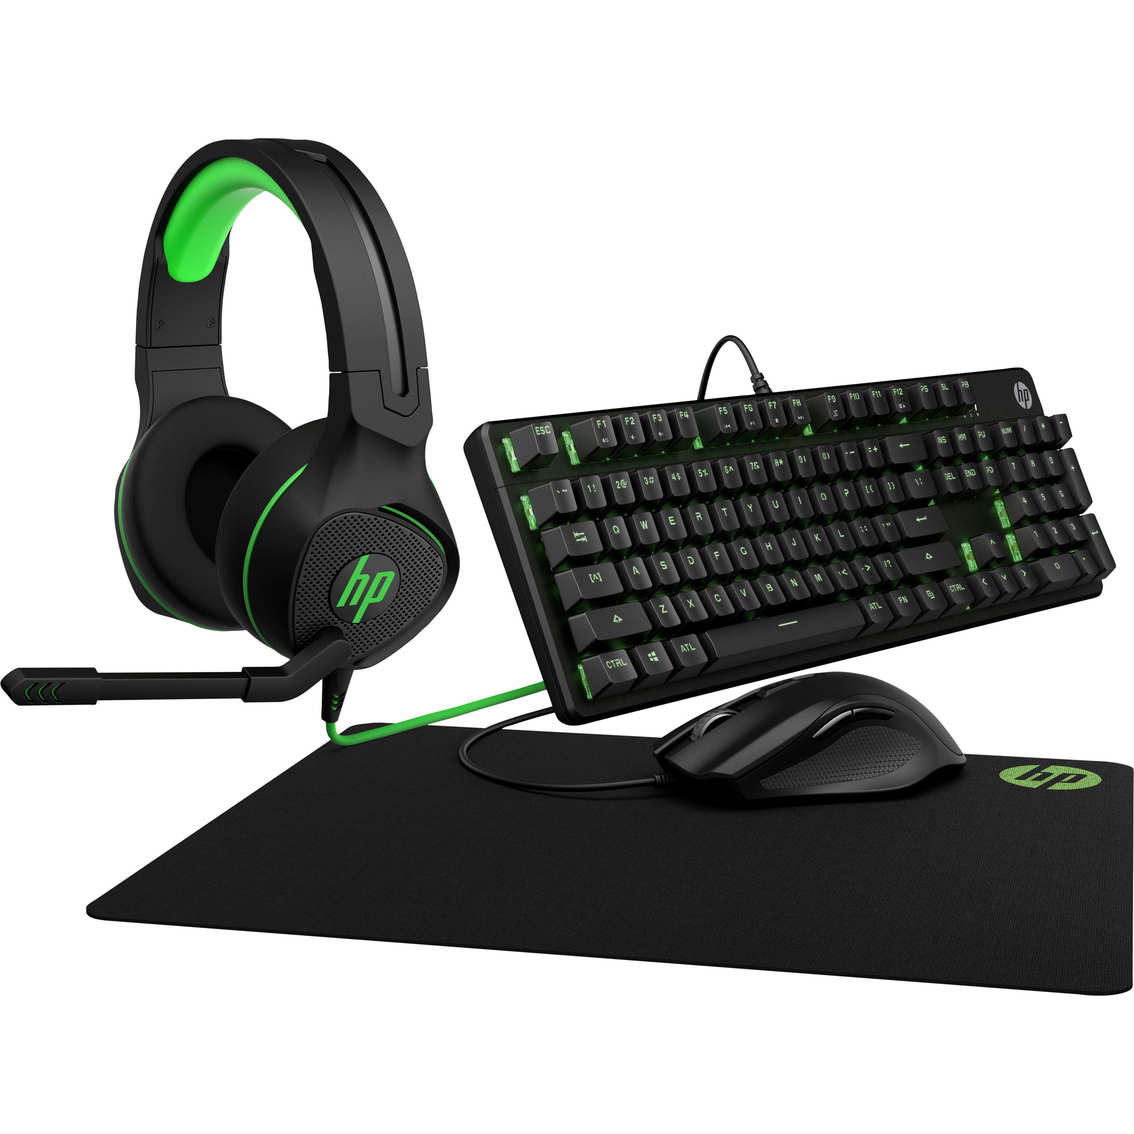 Complete gamer accessories pack for PC